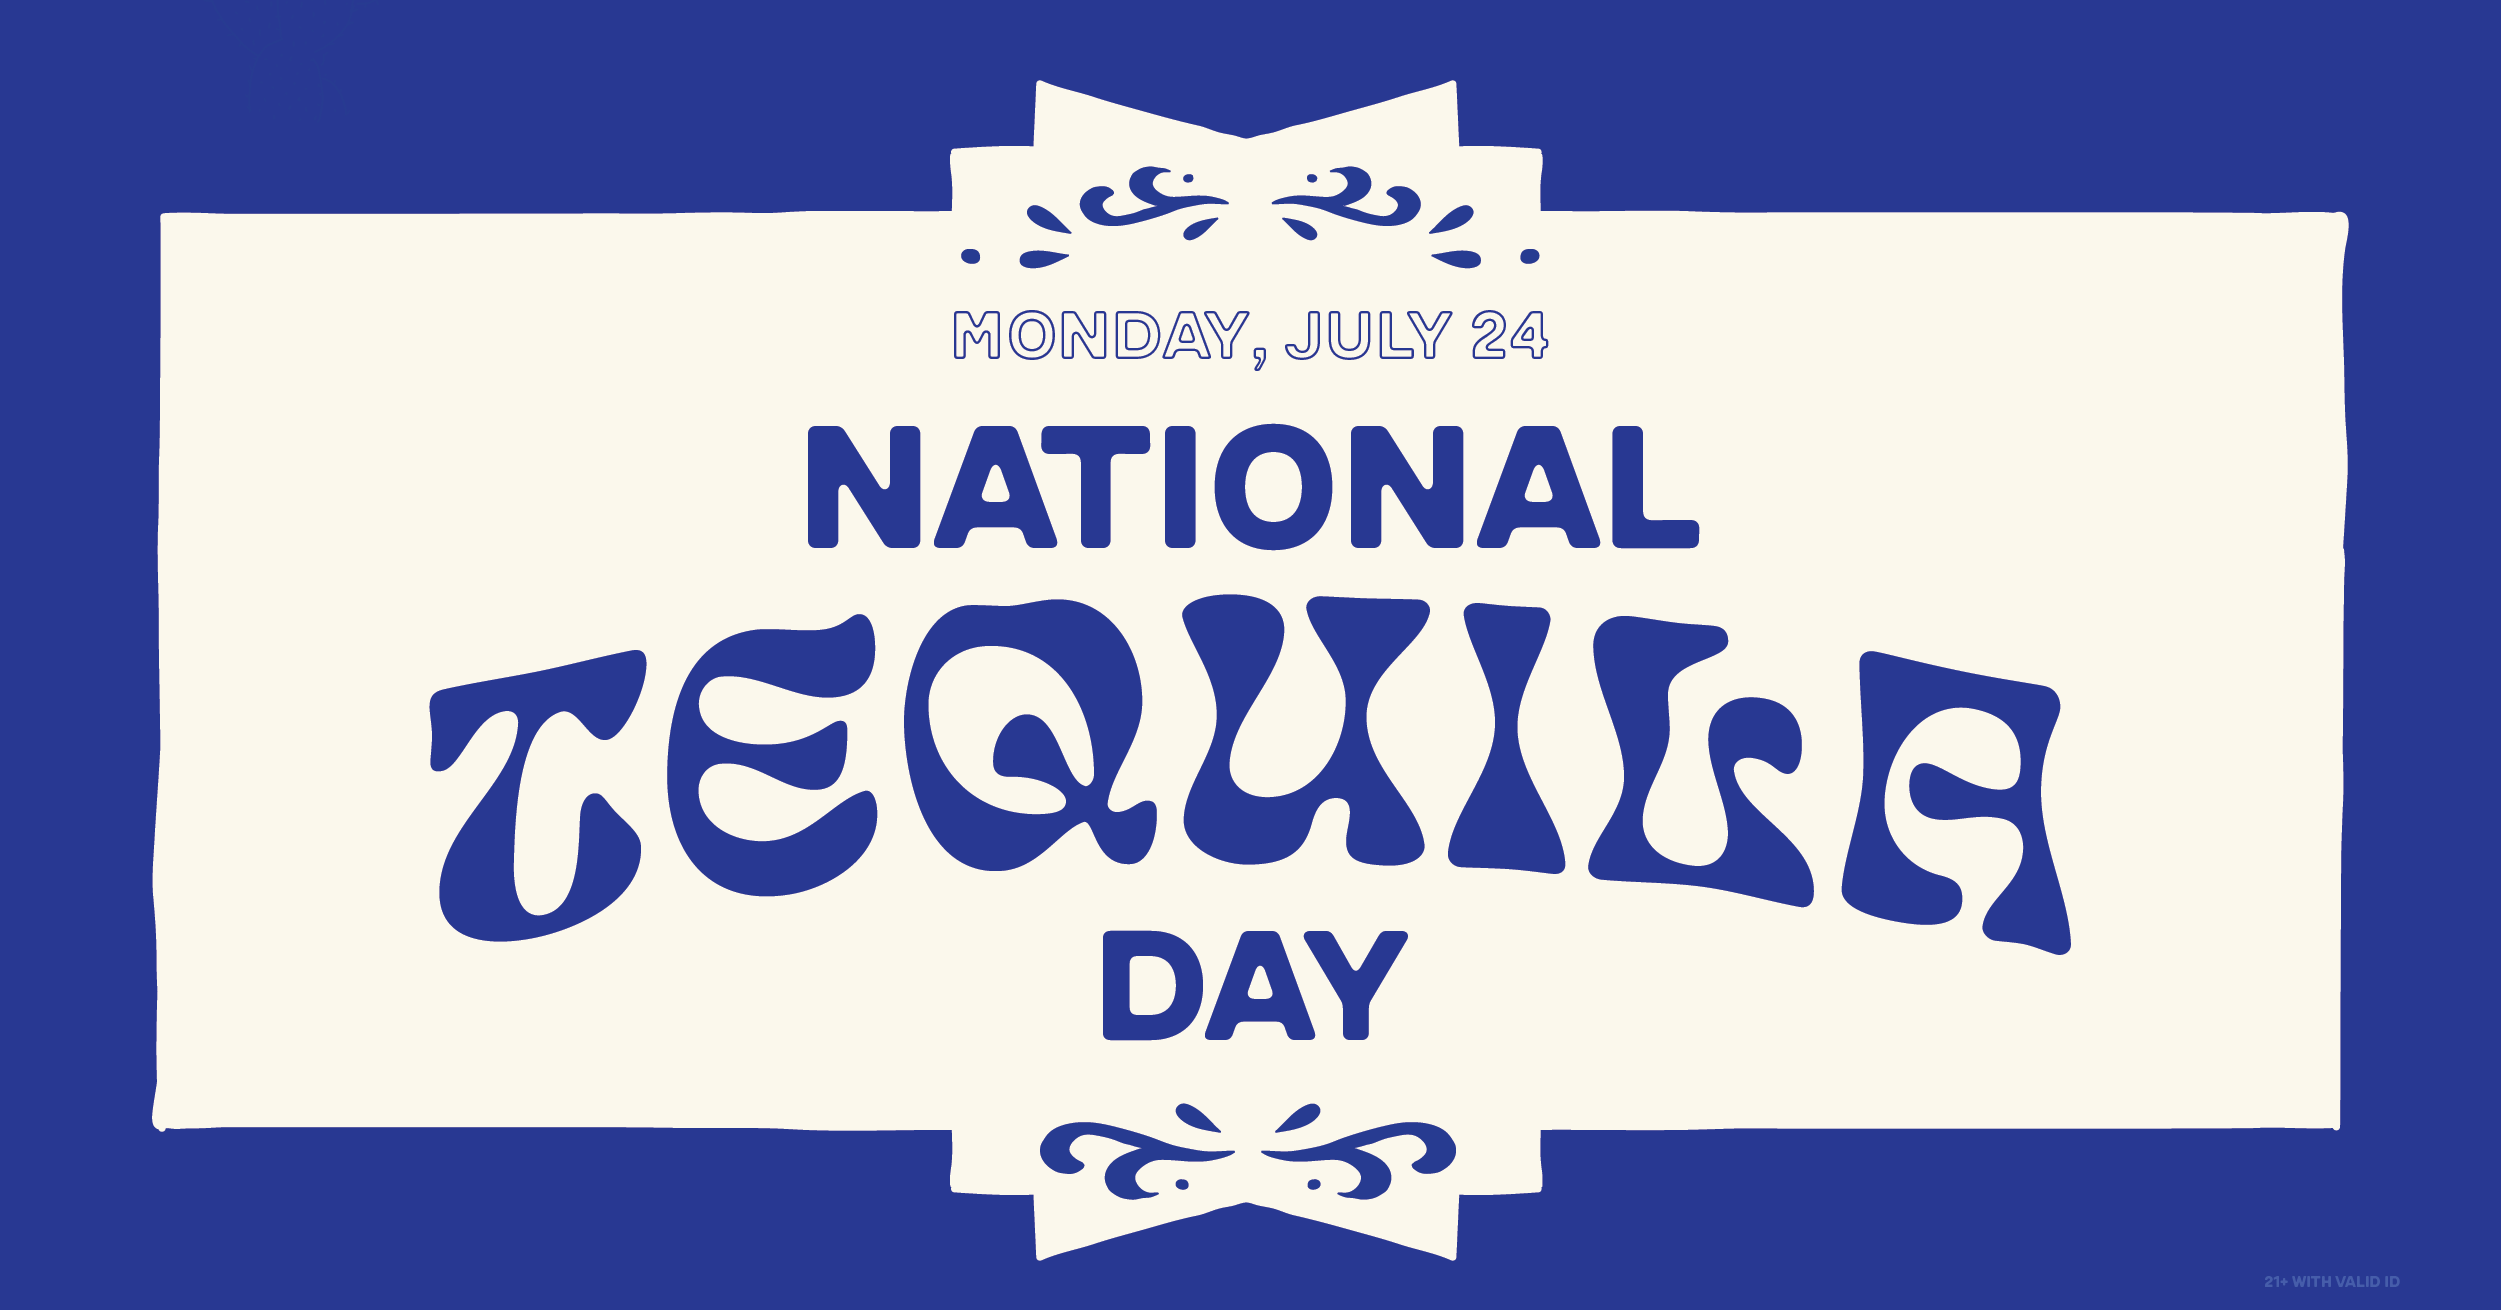 2-for-1 margarita at Felipe's Taqueria on July 24 for National Tequila Day!